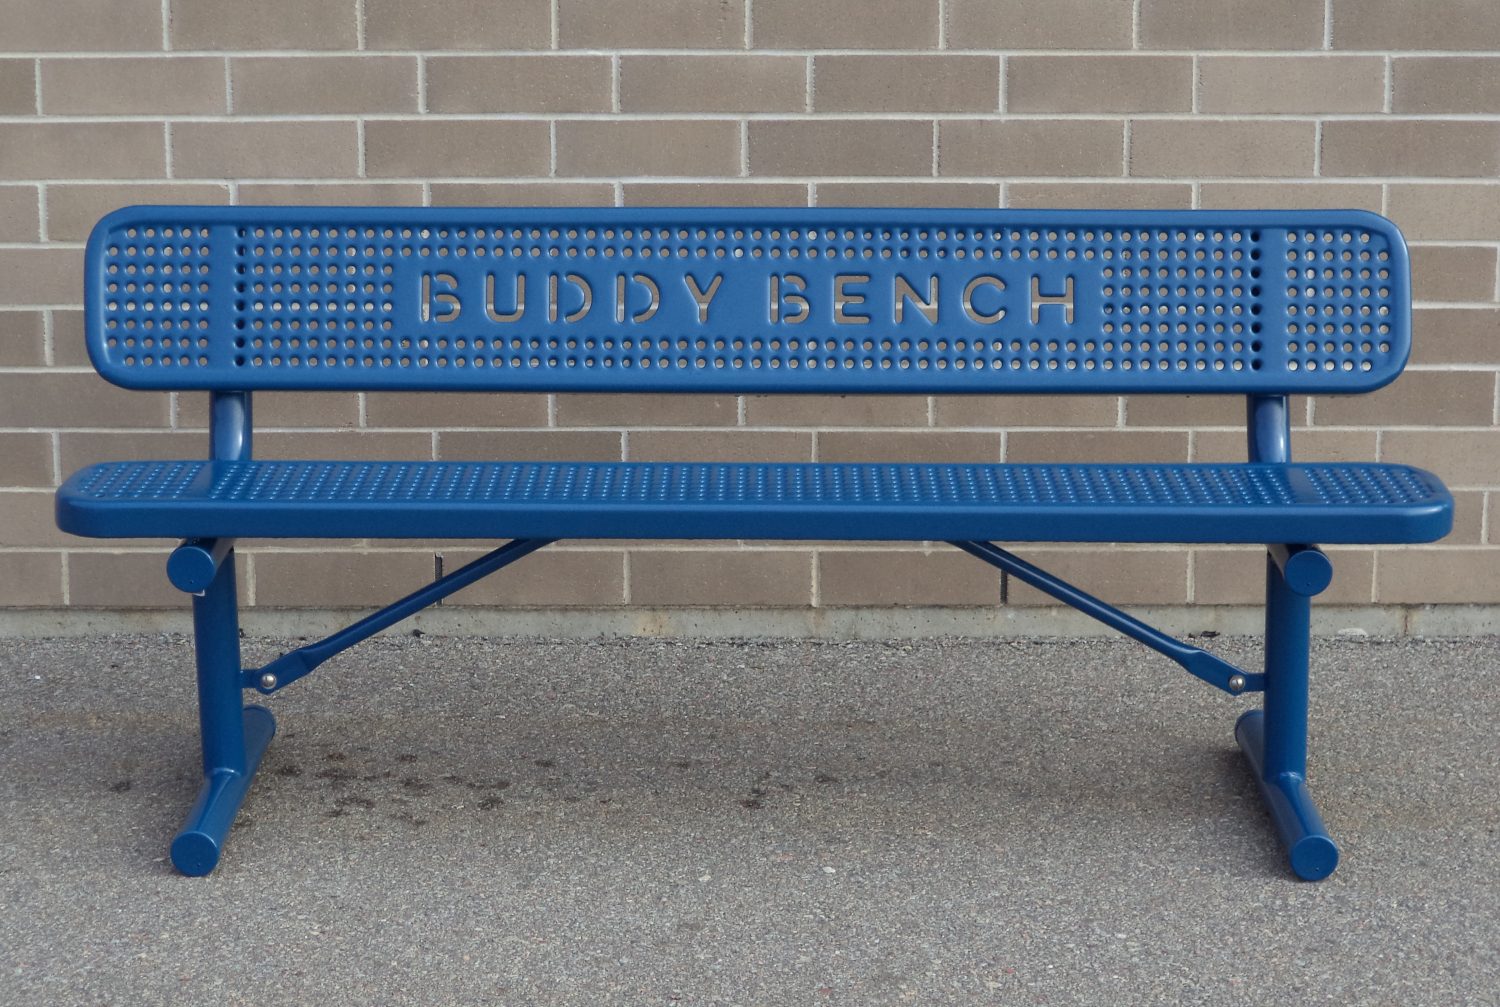 Buddy Benches are found at all Marshfield elementary schools as well as many others throughout the area.